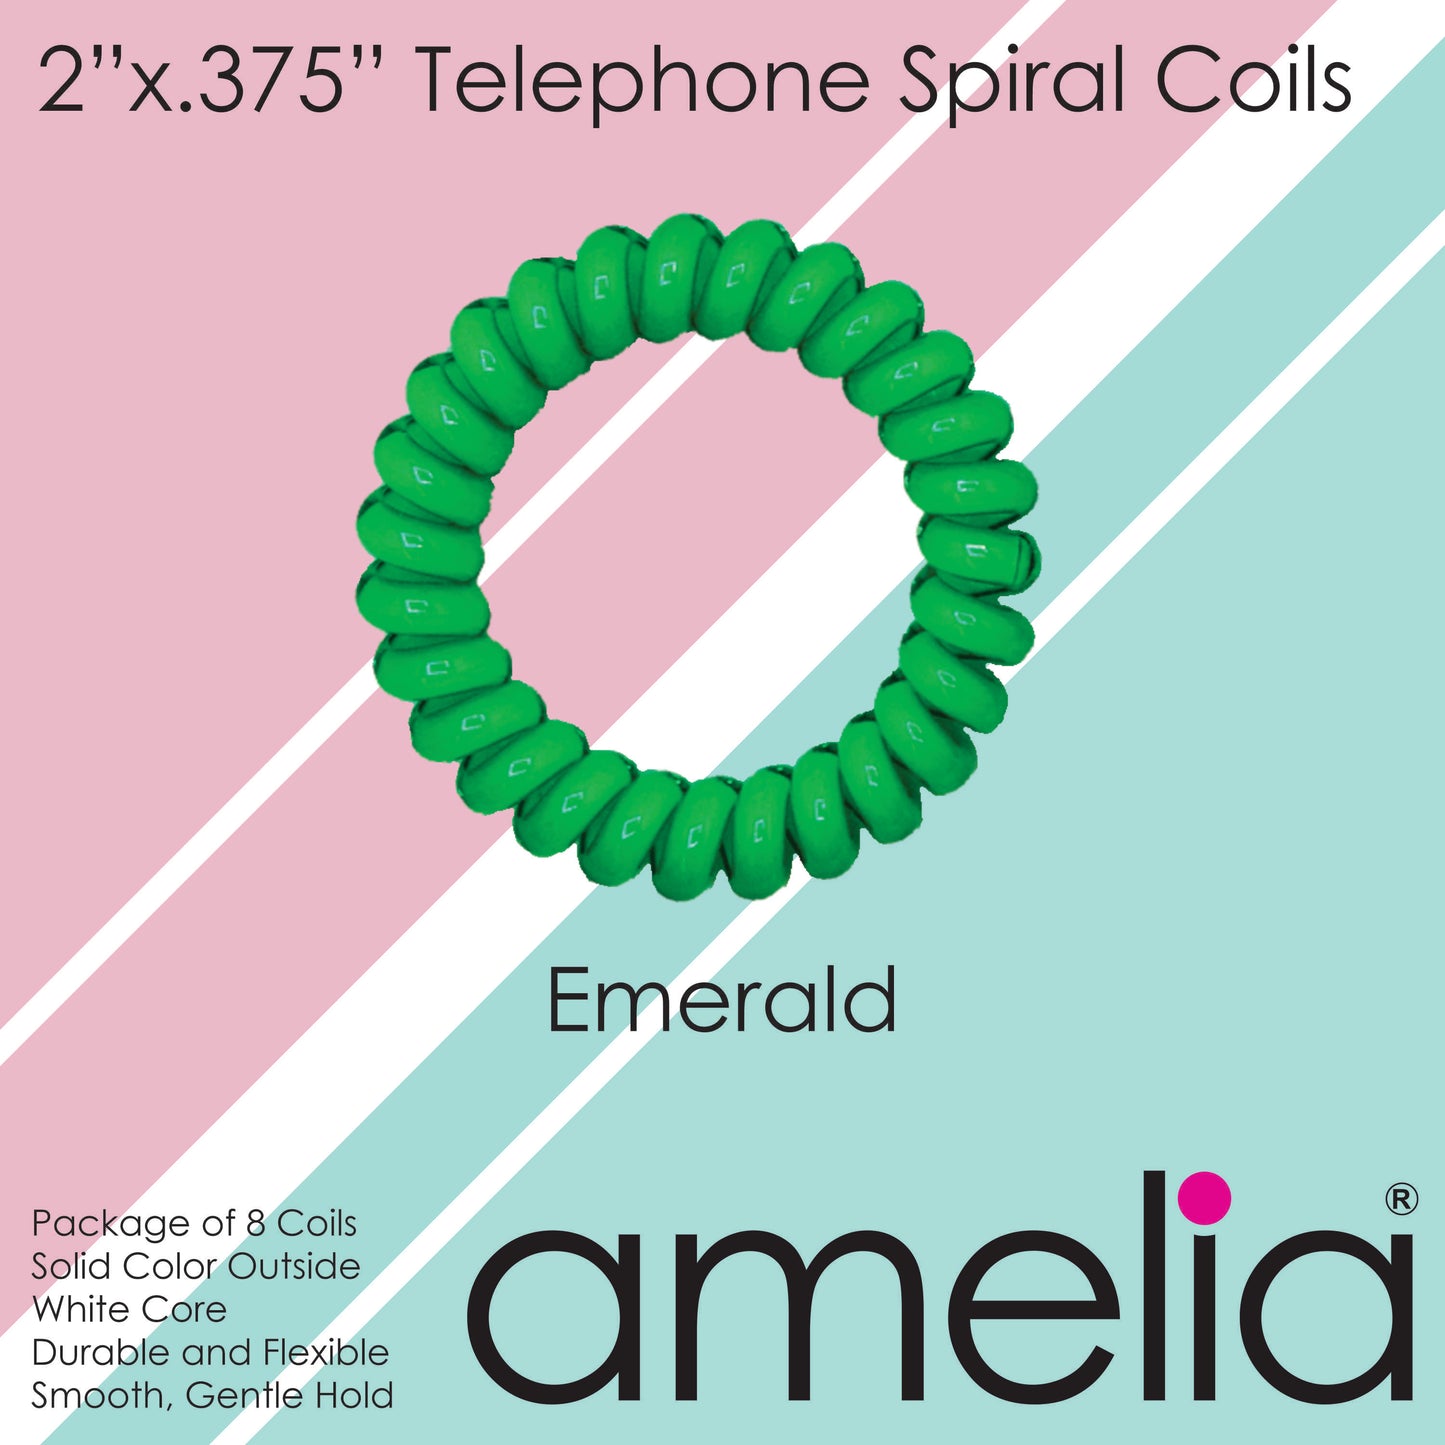 Amelia Beauty Products 8 Medium Elastic Hair Coils, 2.0in Diameter Thick Spiral Hair Ties, Gentle on Hair, Strong Hold and Minimizes Dents and Creases, Emerald